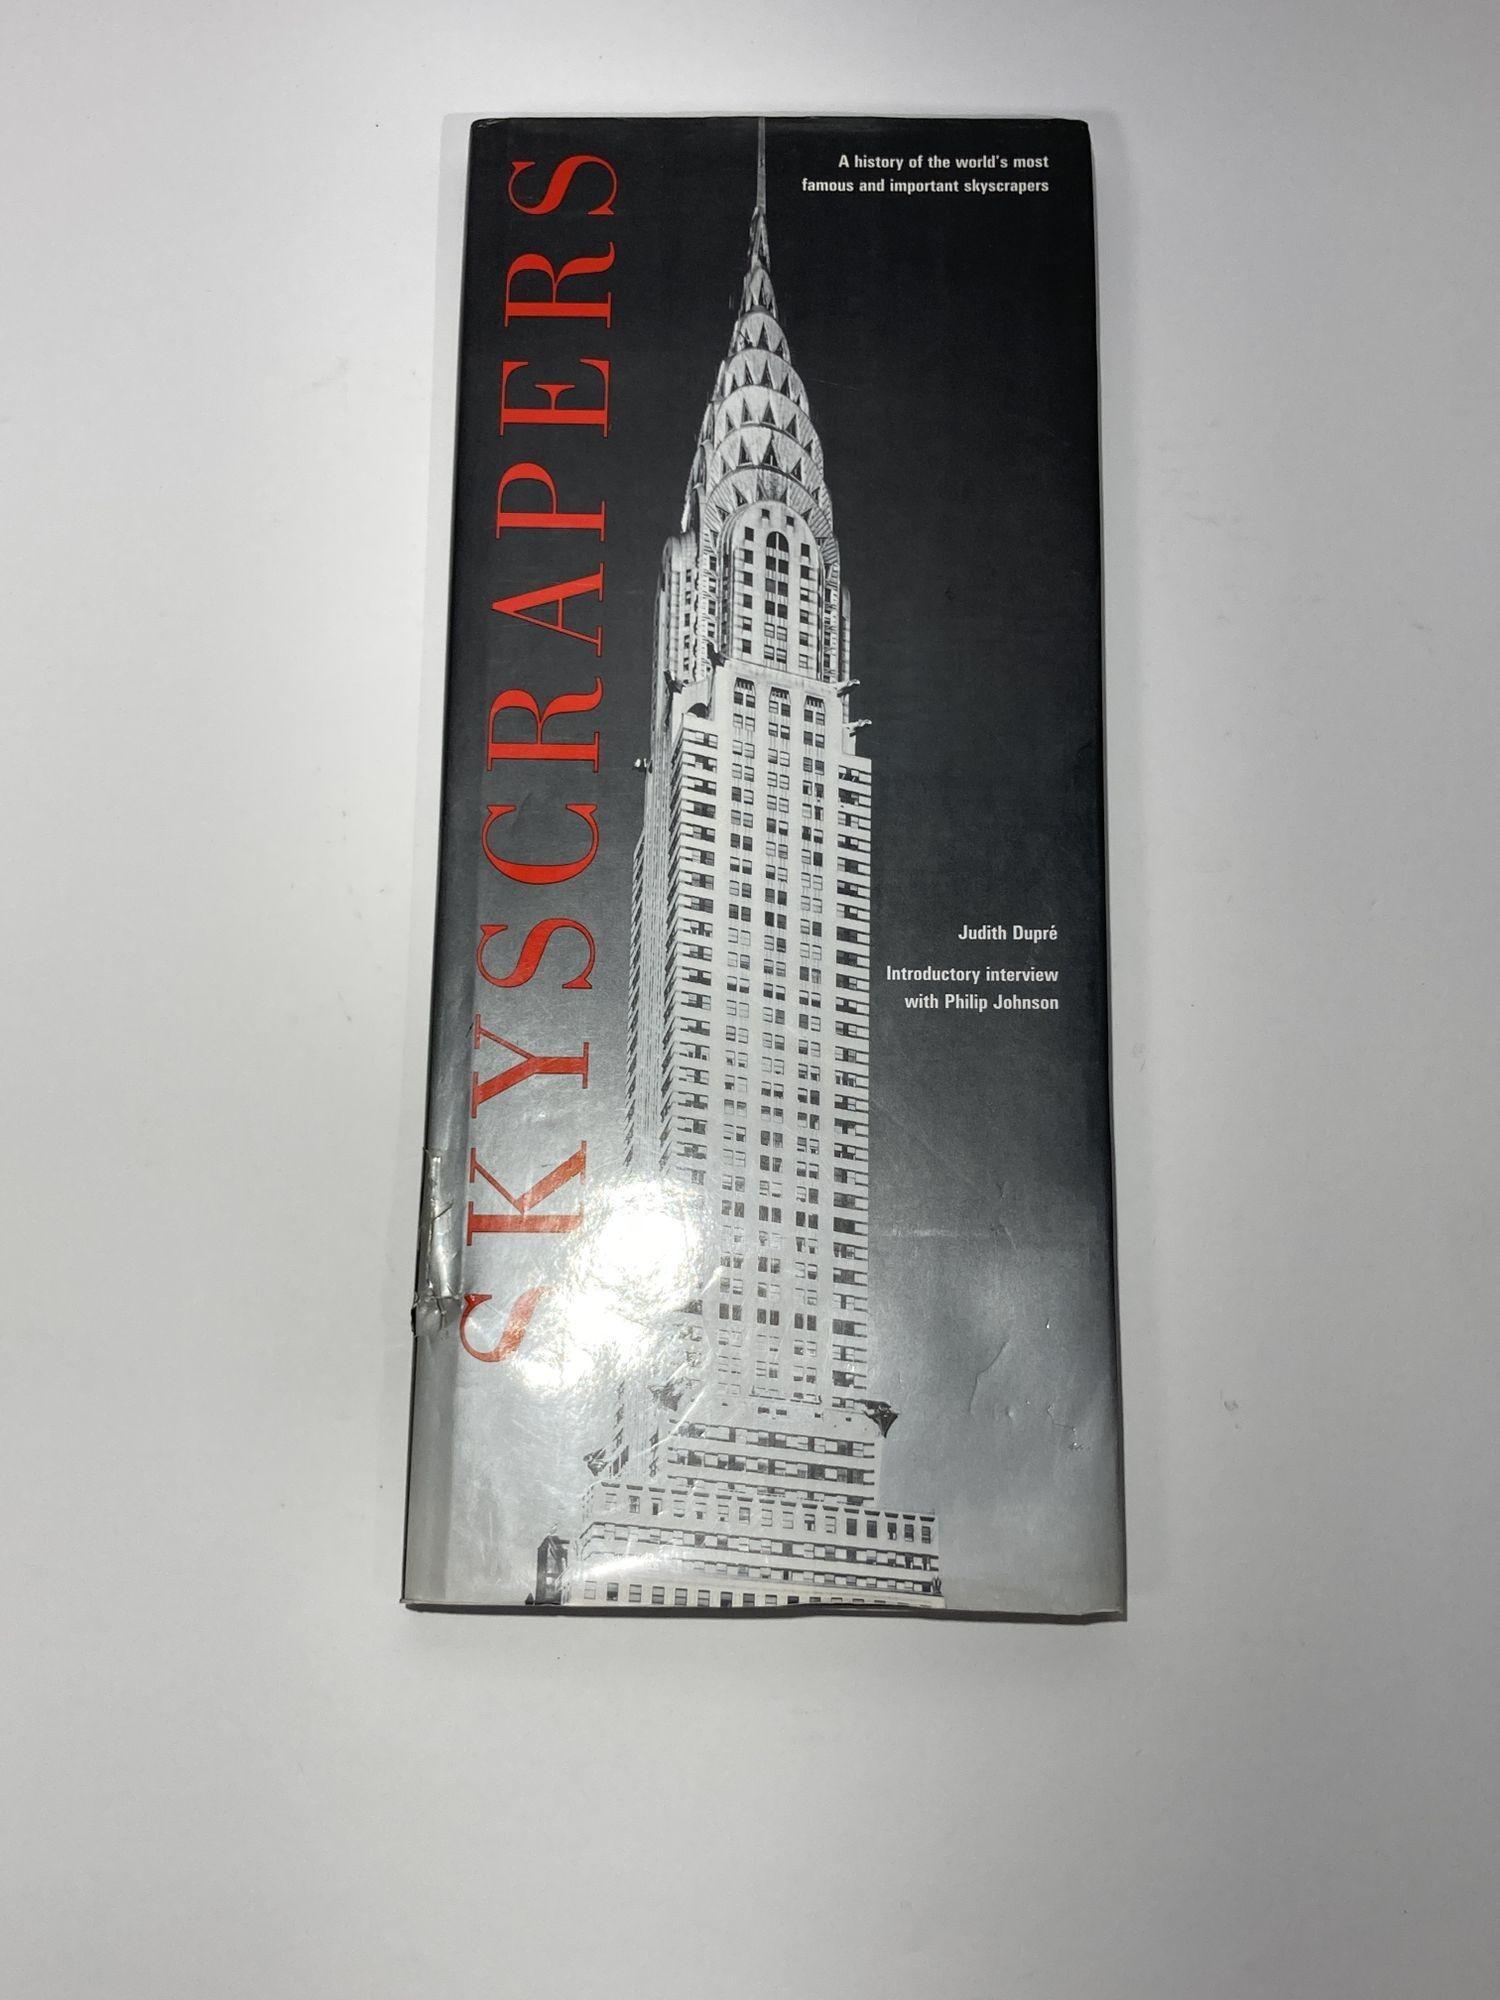 Skyscrapers: A History of the World's Most Famous and Important Skyscrapers. 
By Judith Dupre, Published by Black Dog & Leventhal Publishers, New York, N.Y., 1996.
1st Edition, 1st Printing.
Extremely tall elephant folio (18 inches tall x 8